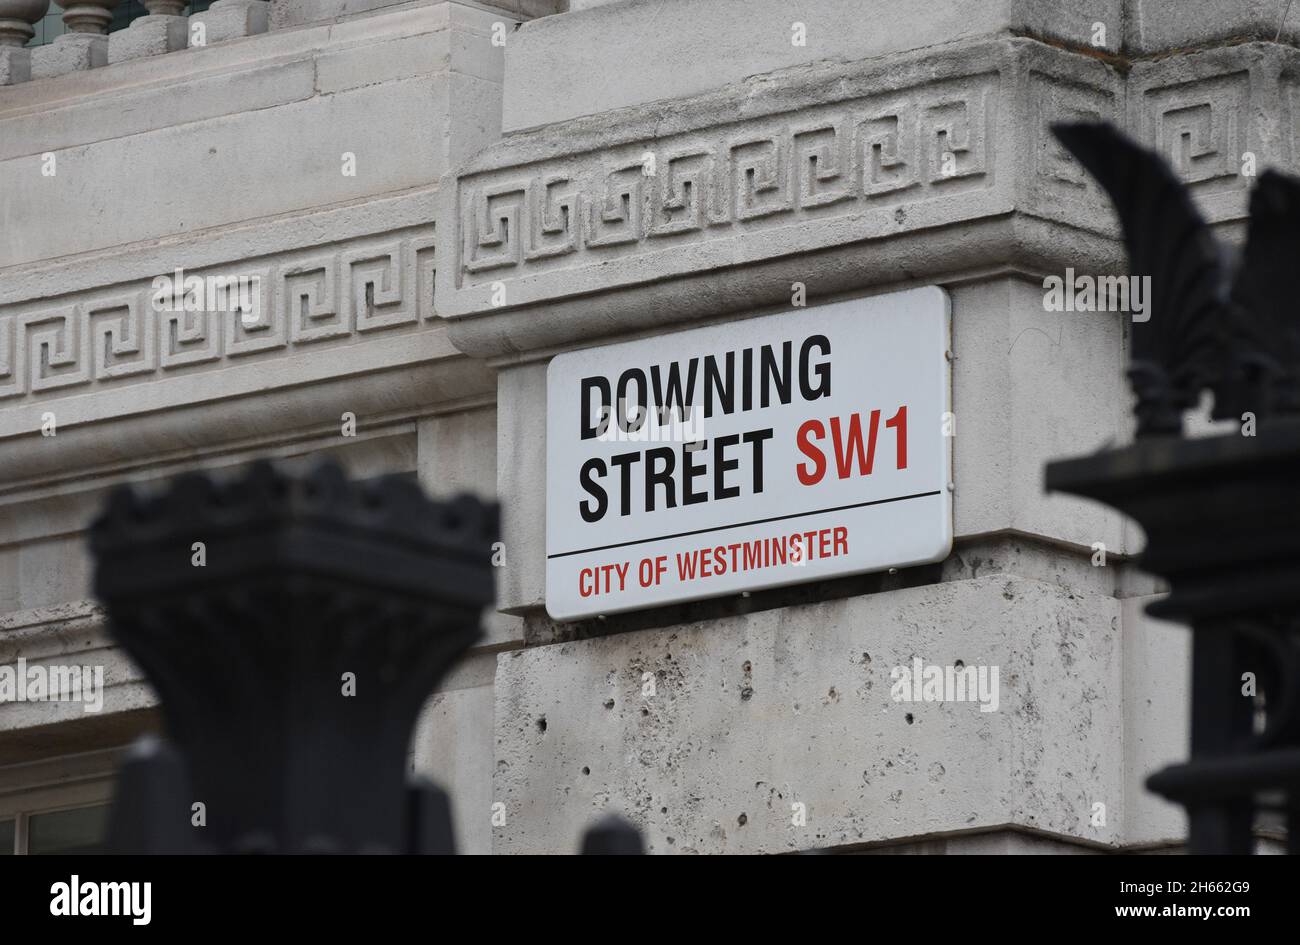 The Street Sign for Downing Street in London where.the residences of the British Prime Minister and Chancellor of the Exchequer are located Stock Photo